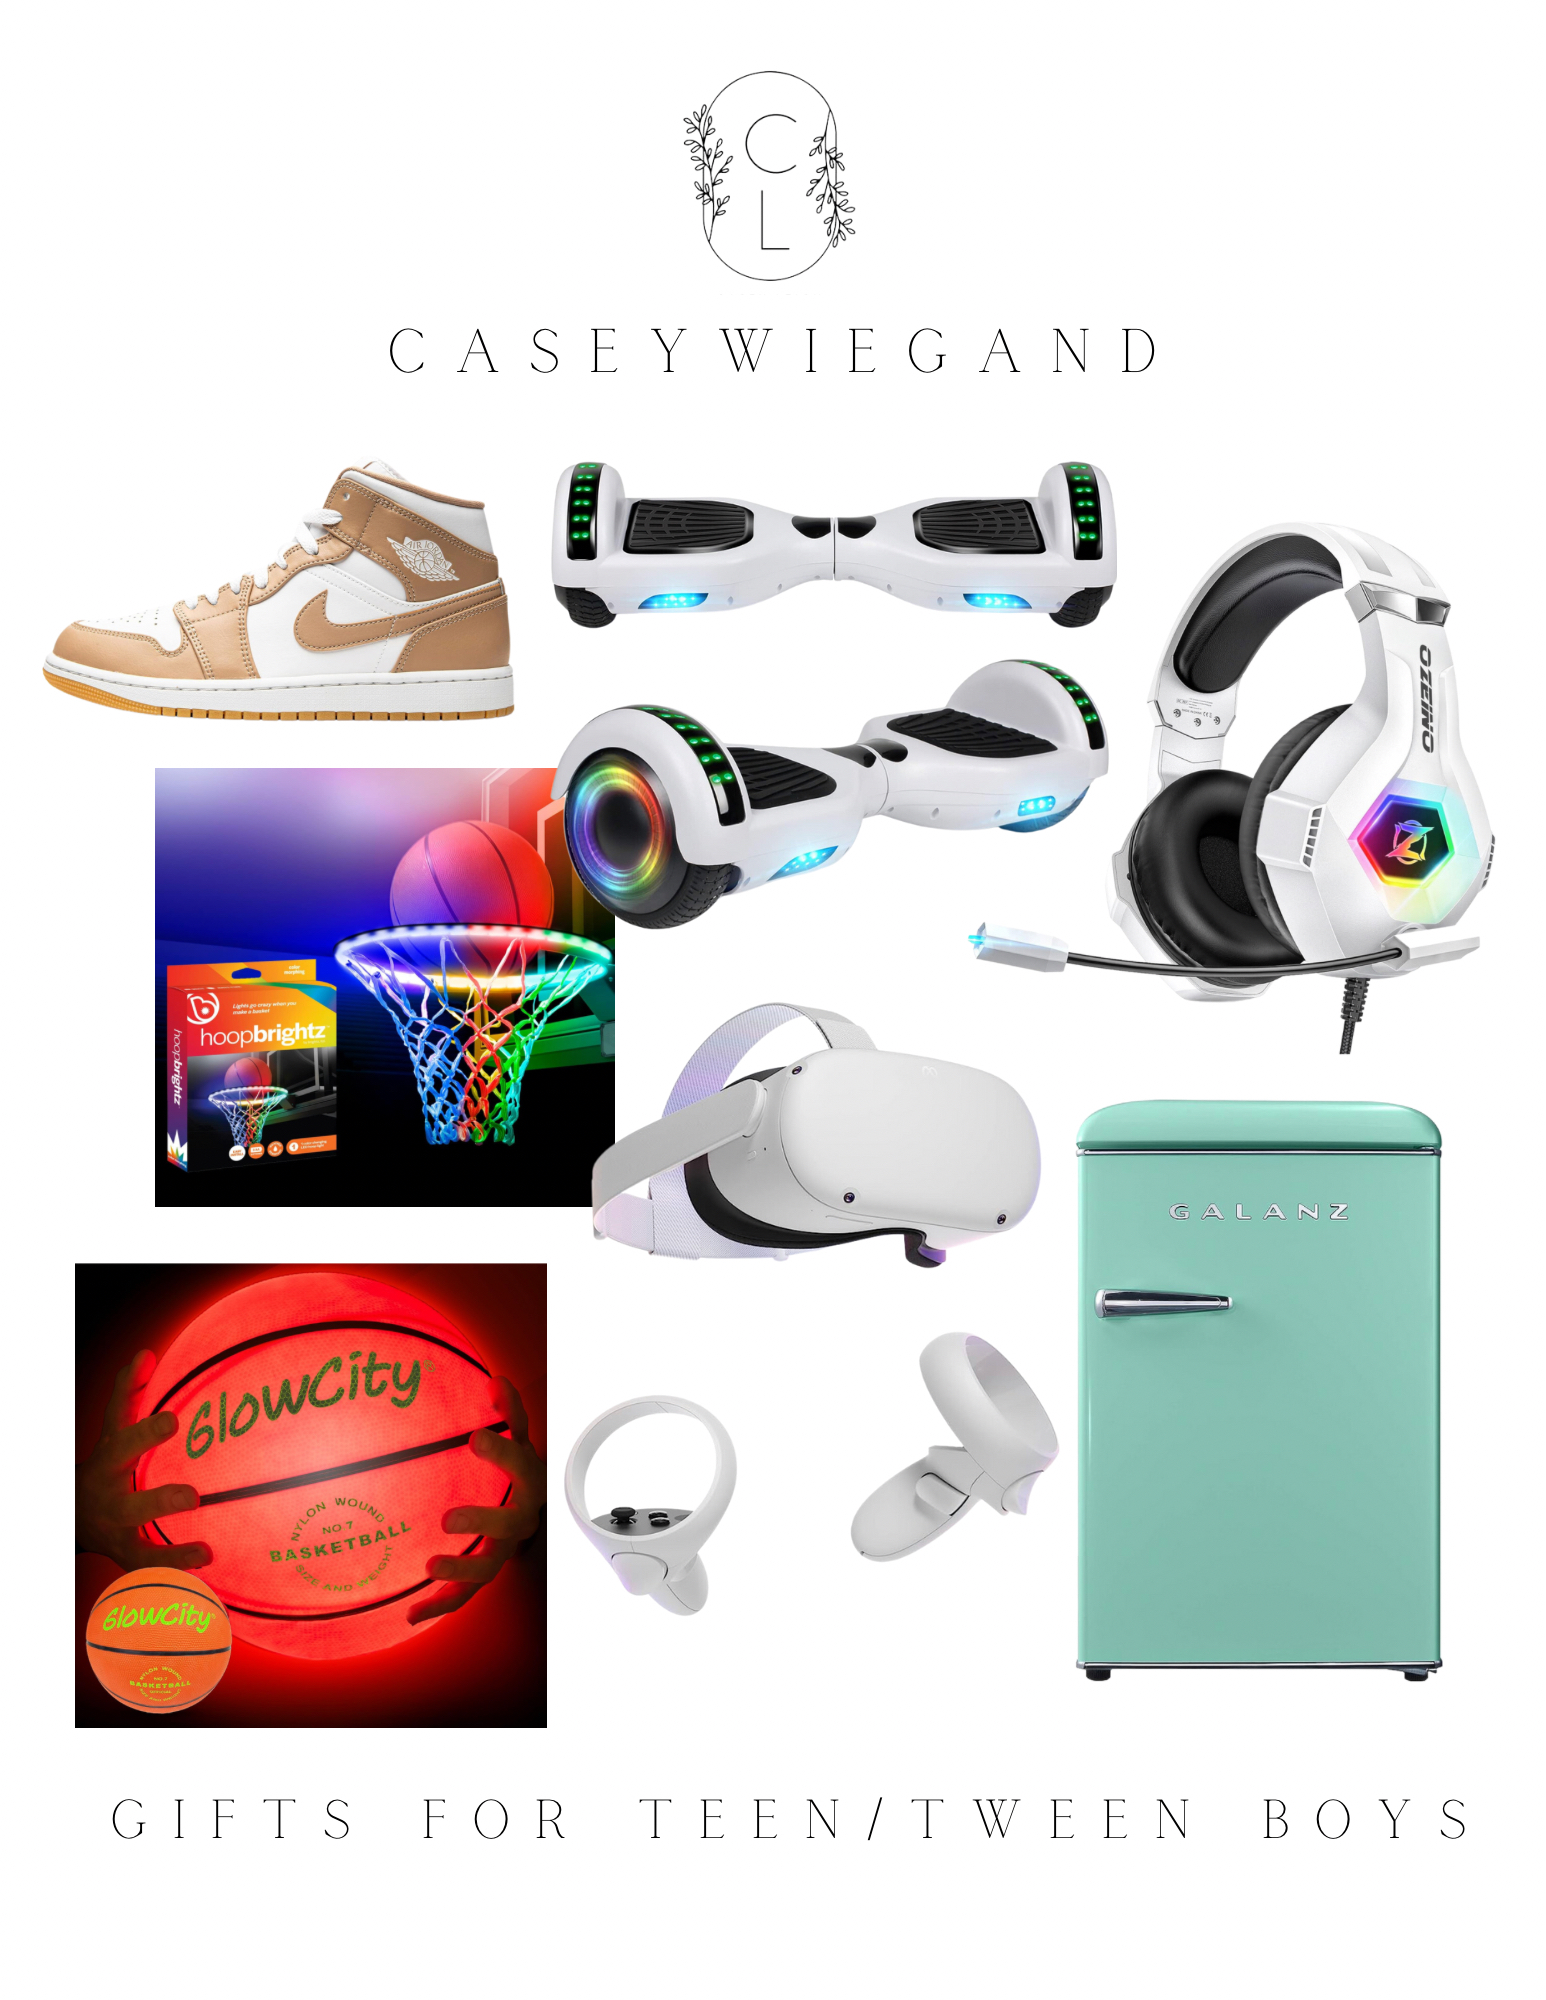 28 Cool Gifts for Gamers 2023 - Raising Teens Today